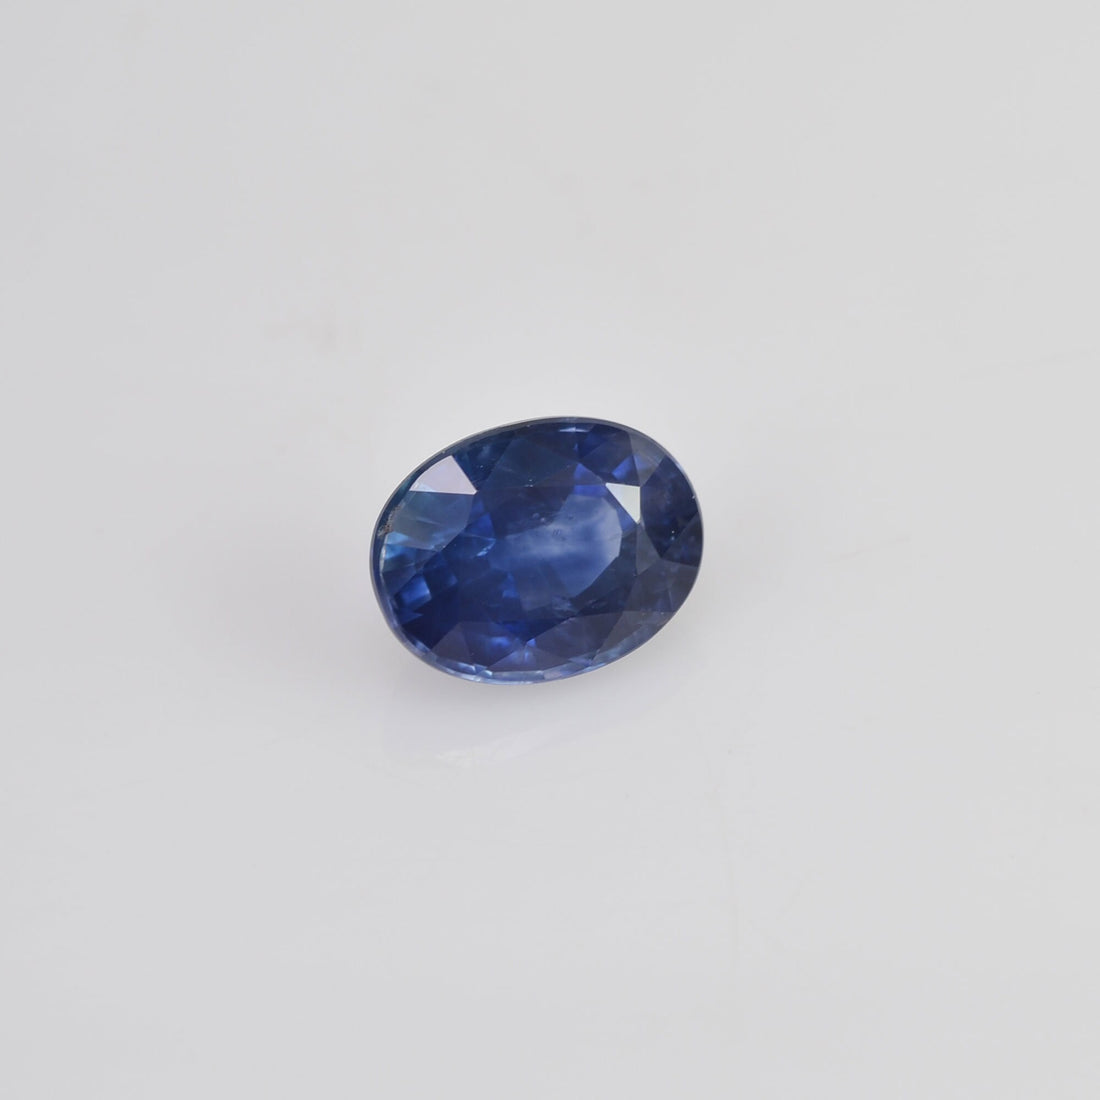 1.05 cts Natural Blue Sapphire Loose Gemstone Oval Cut